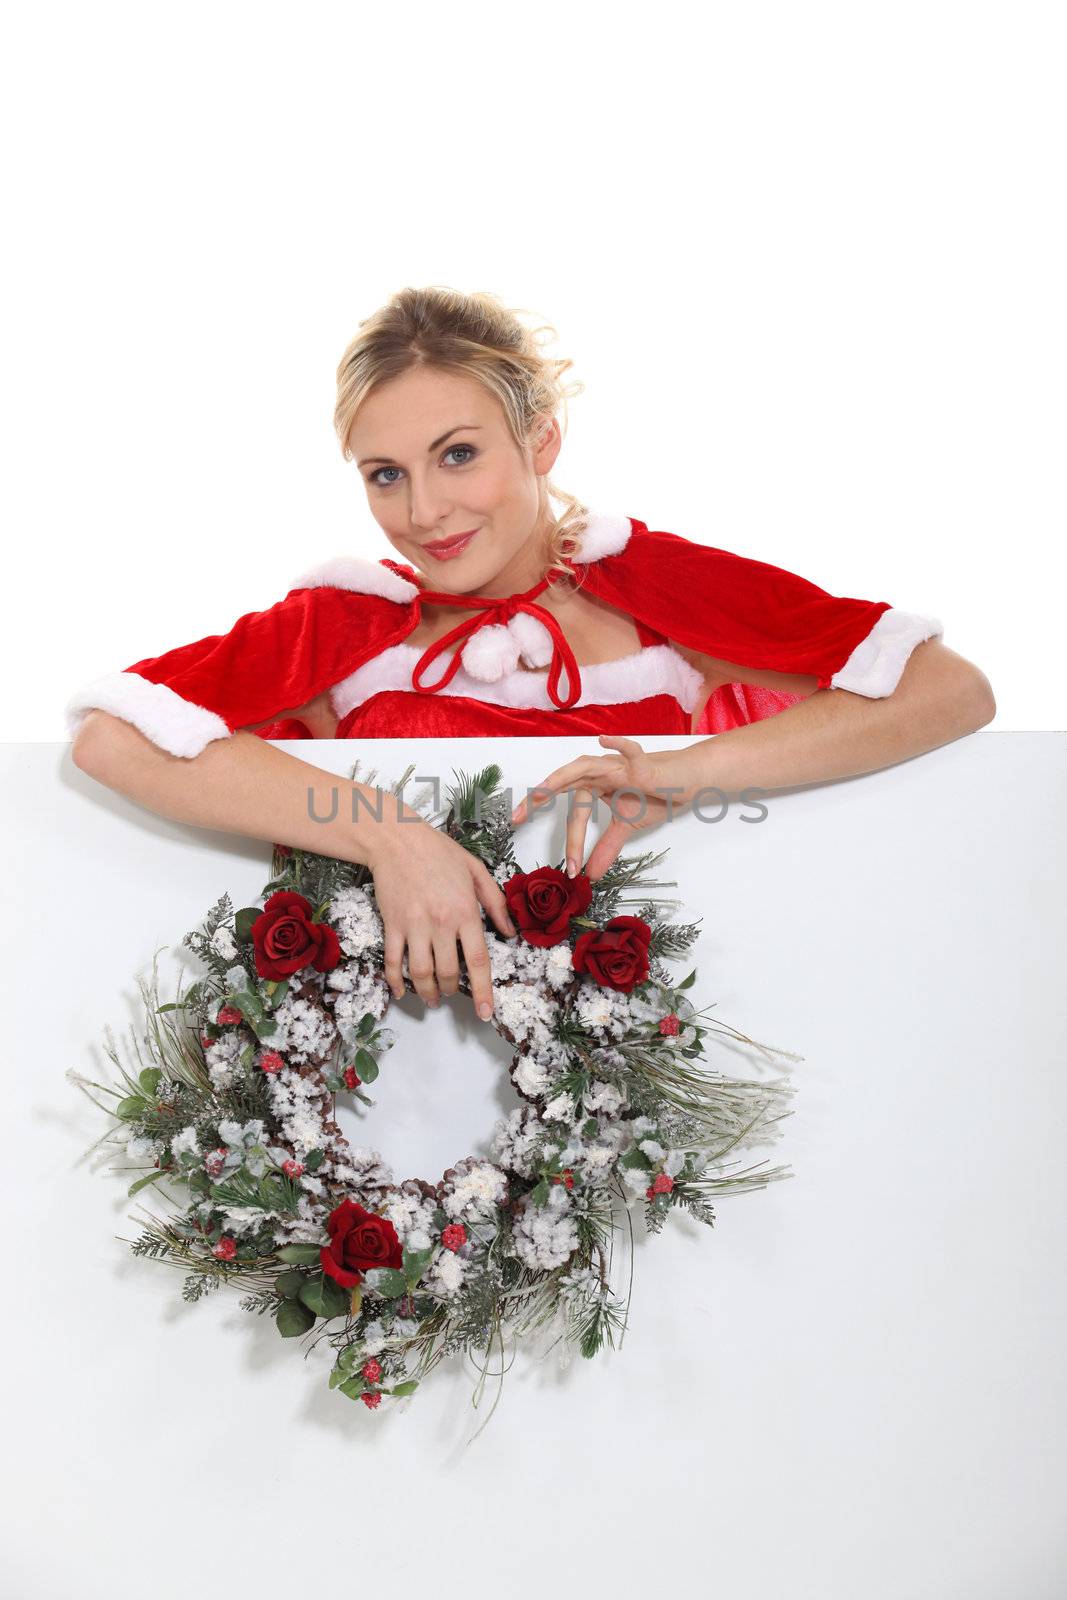 Woman dressed as Mrs. Claus and holding a wreath by phovoir